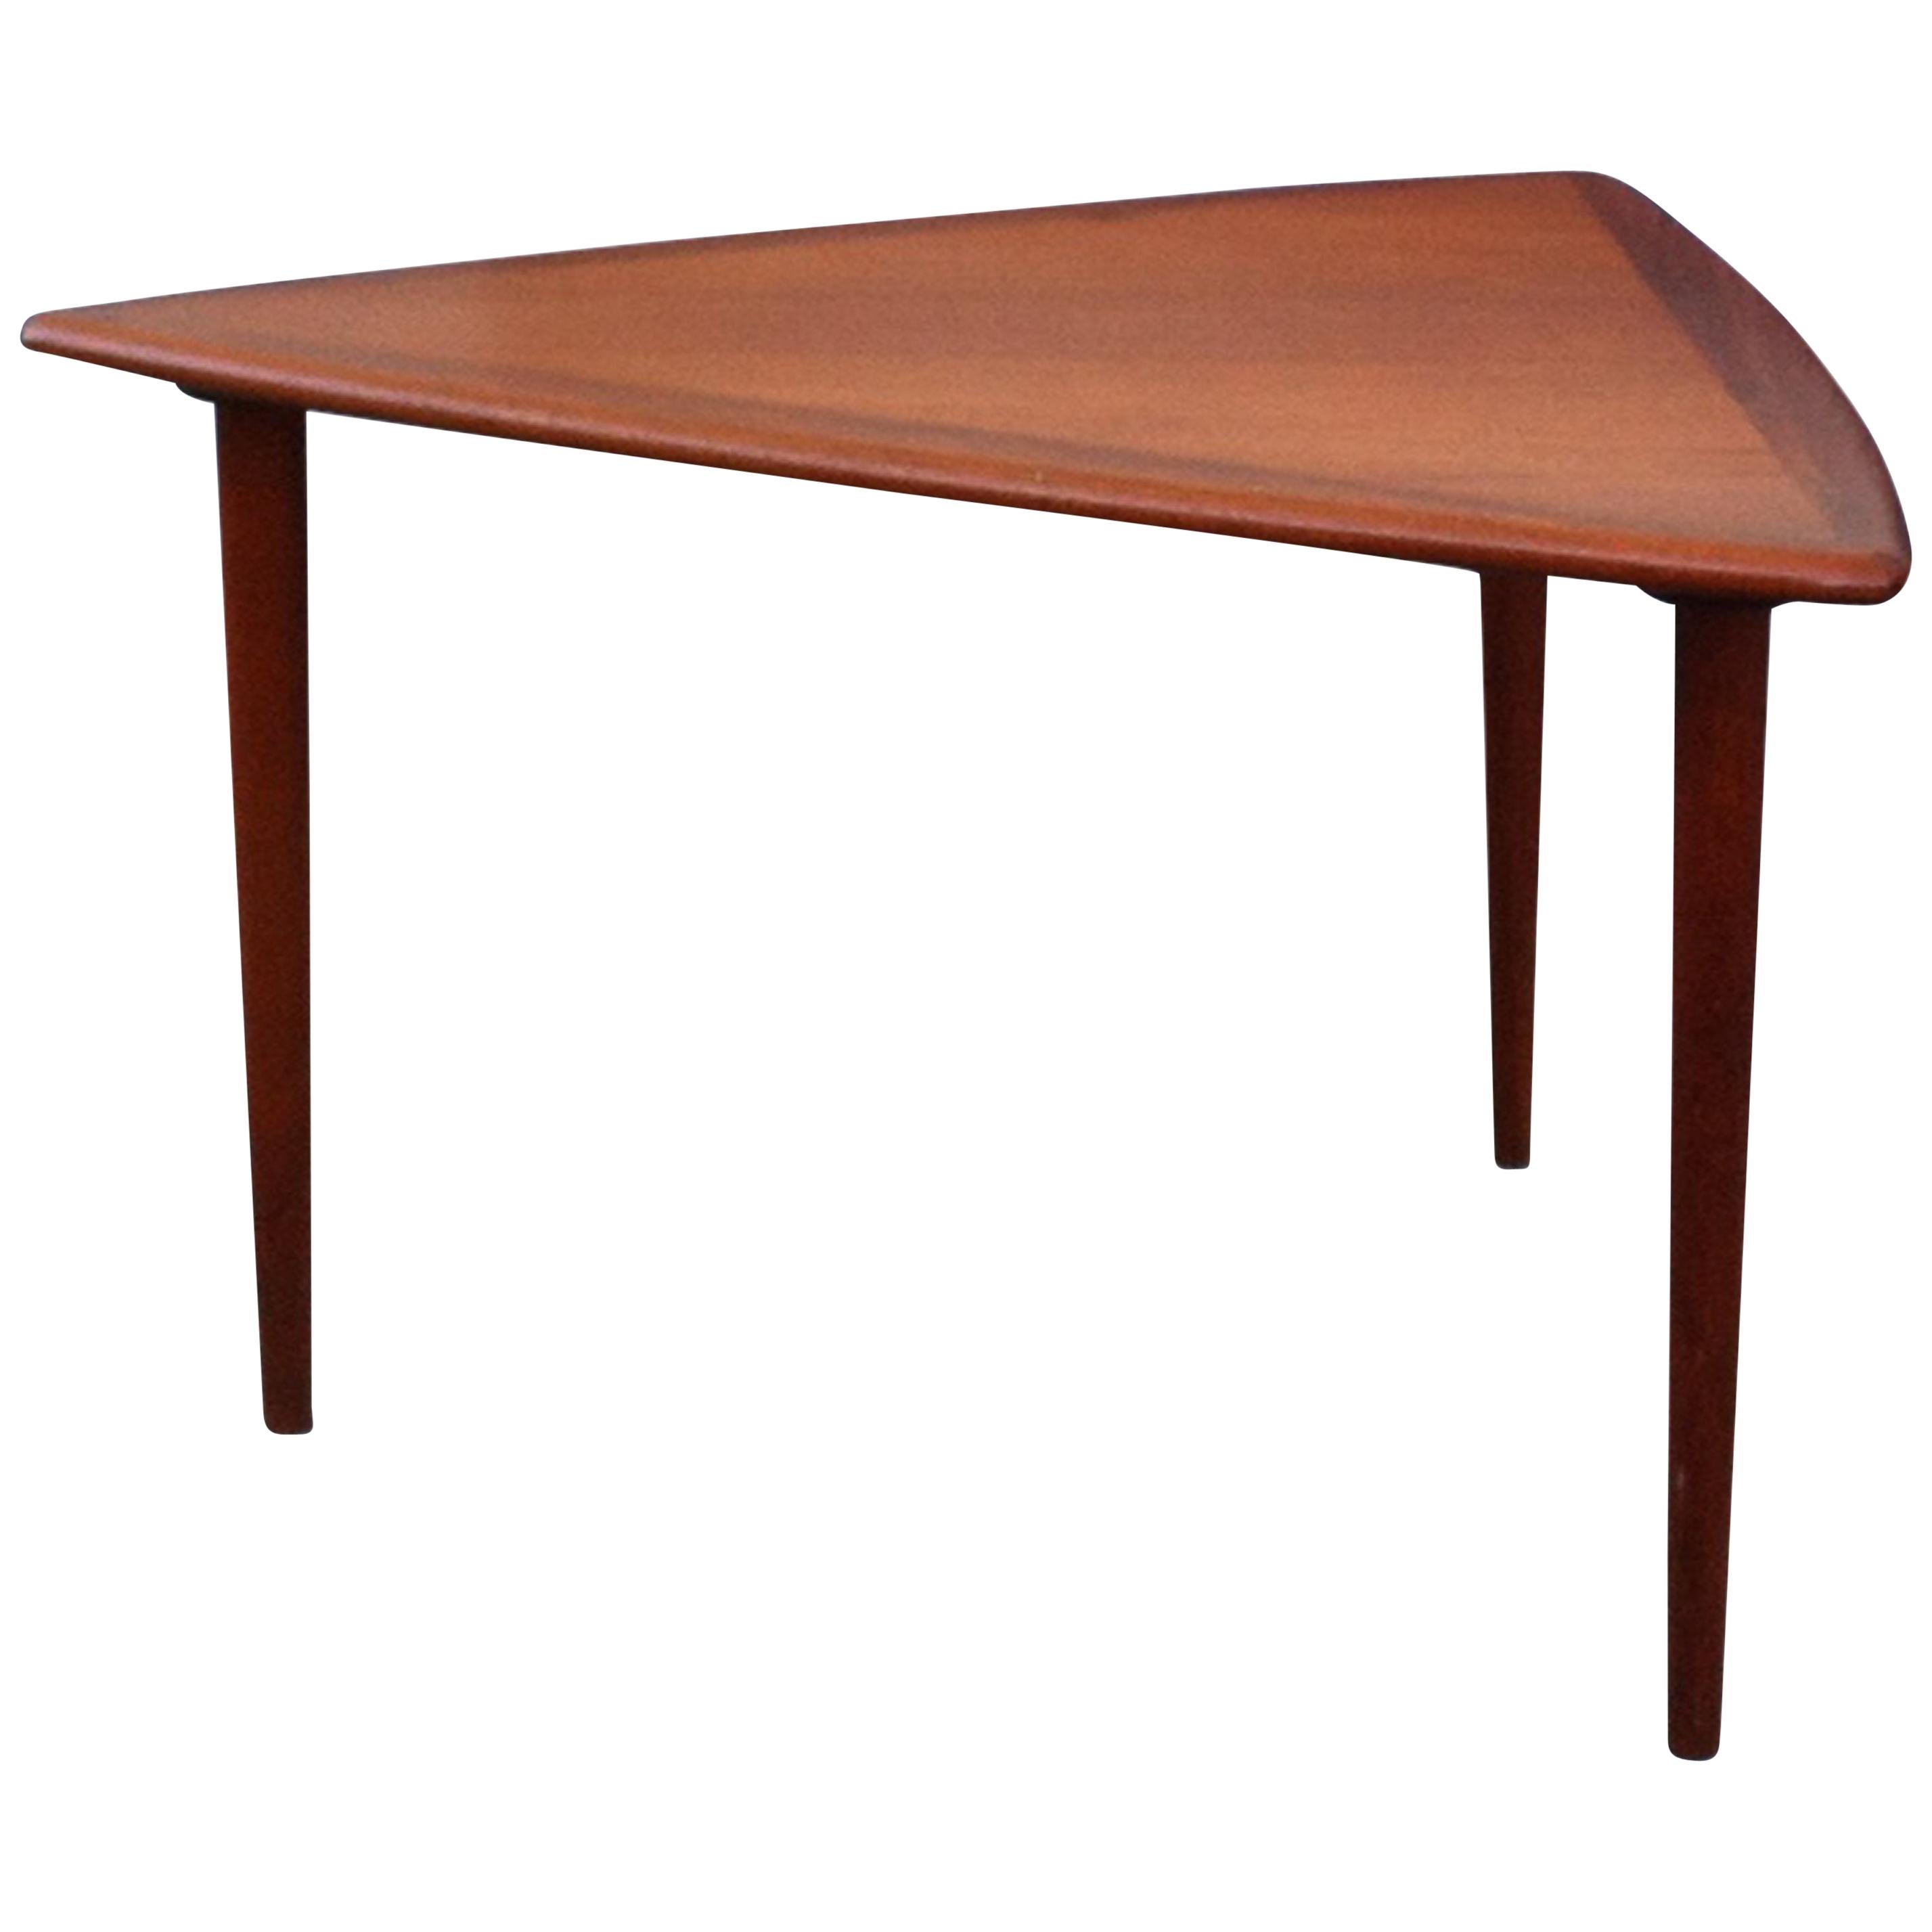 Triangular Shaped Danish Modern Teak Coffee Table with Rounded Profiles, 1960s